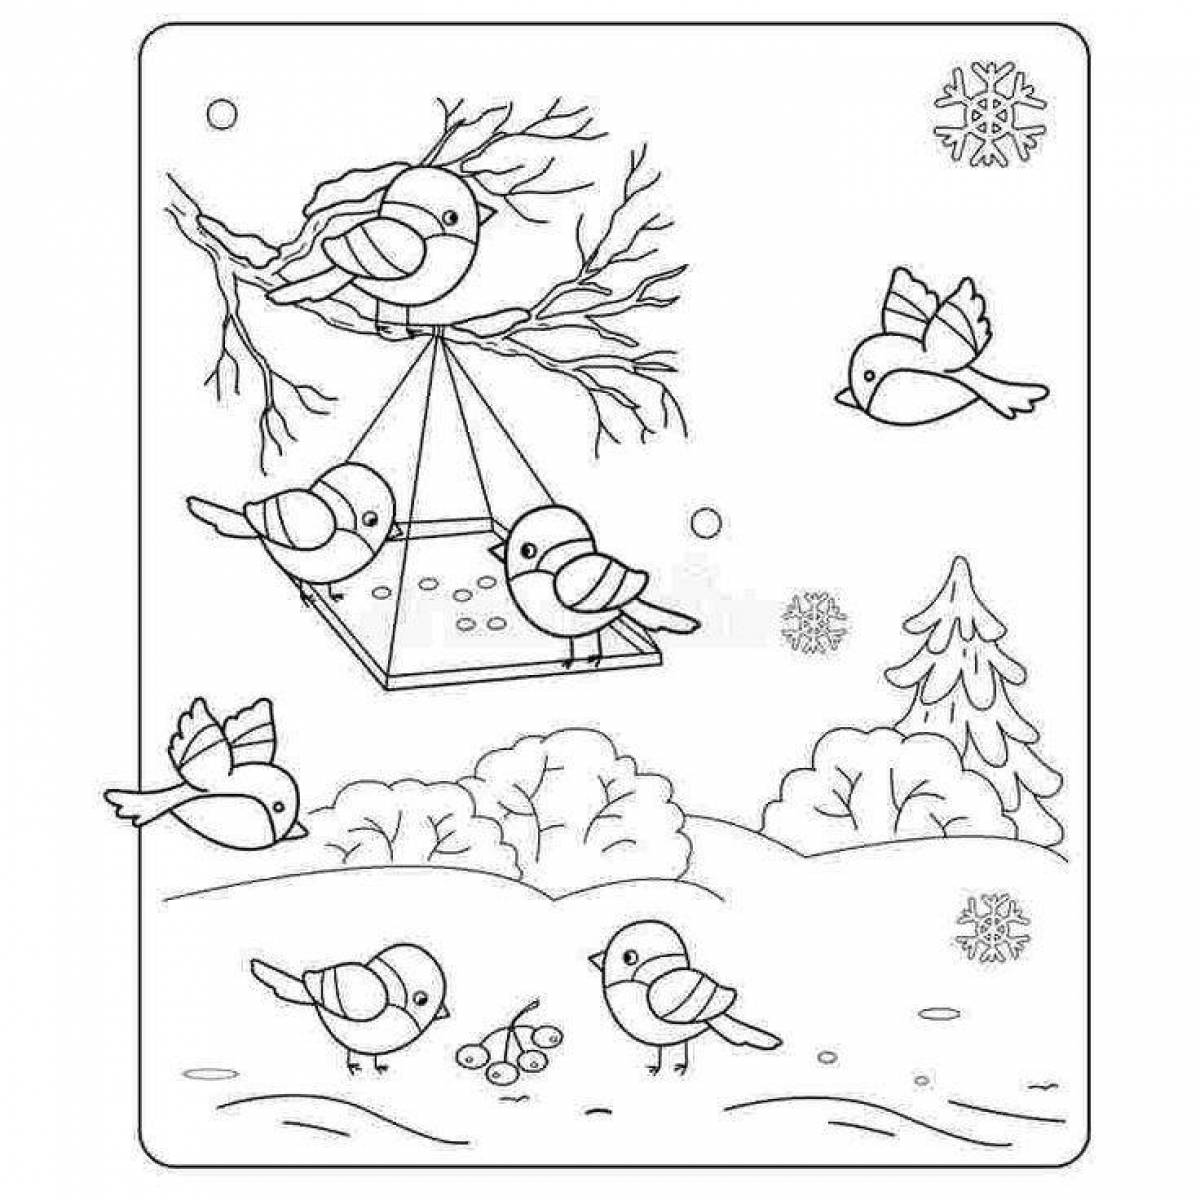 Coloring page stimulating feeder for beginners